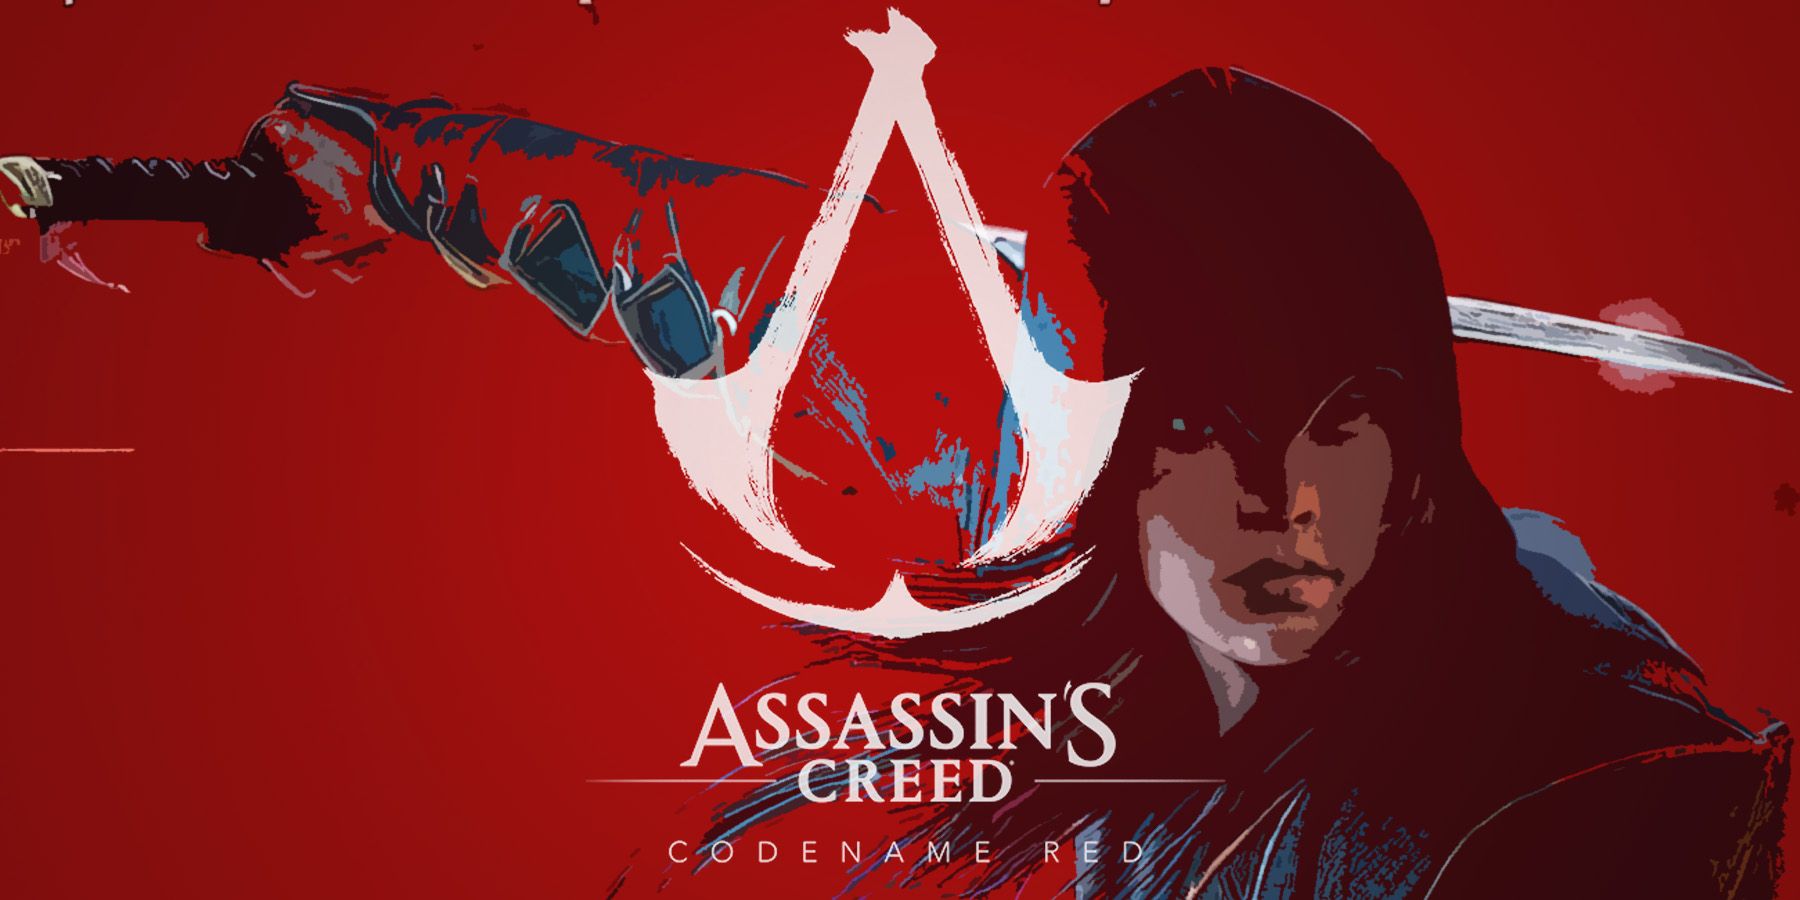 Assassin's Creed Codename Red female protagonist poster art edit with game logo